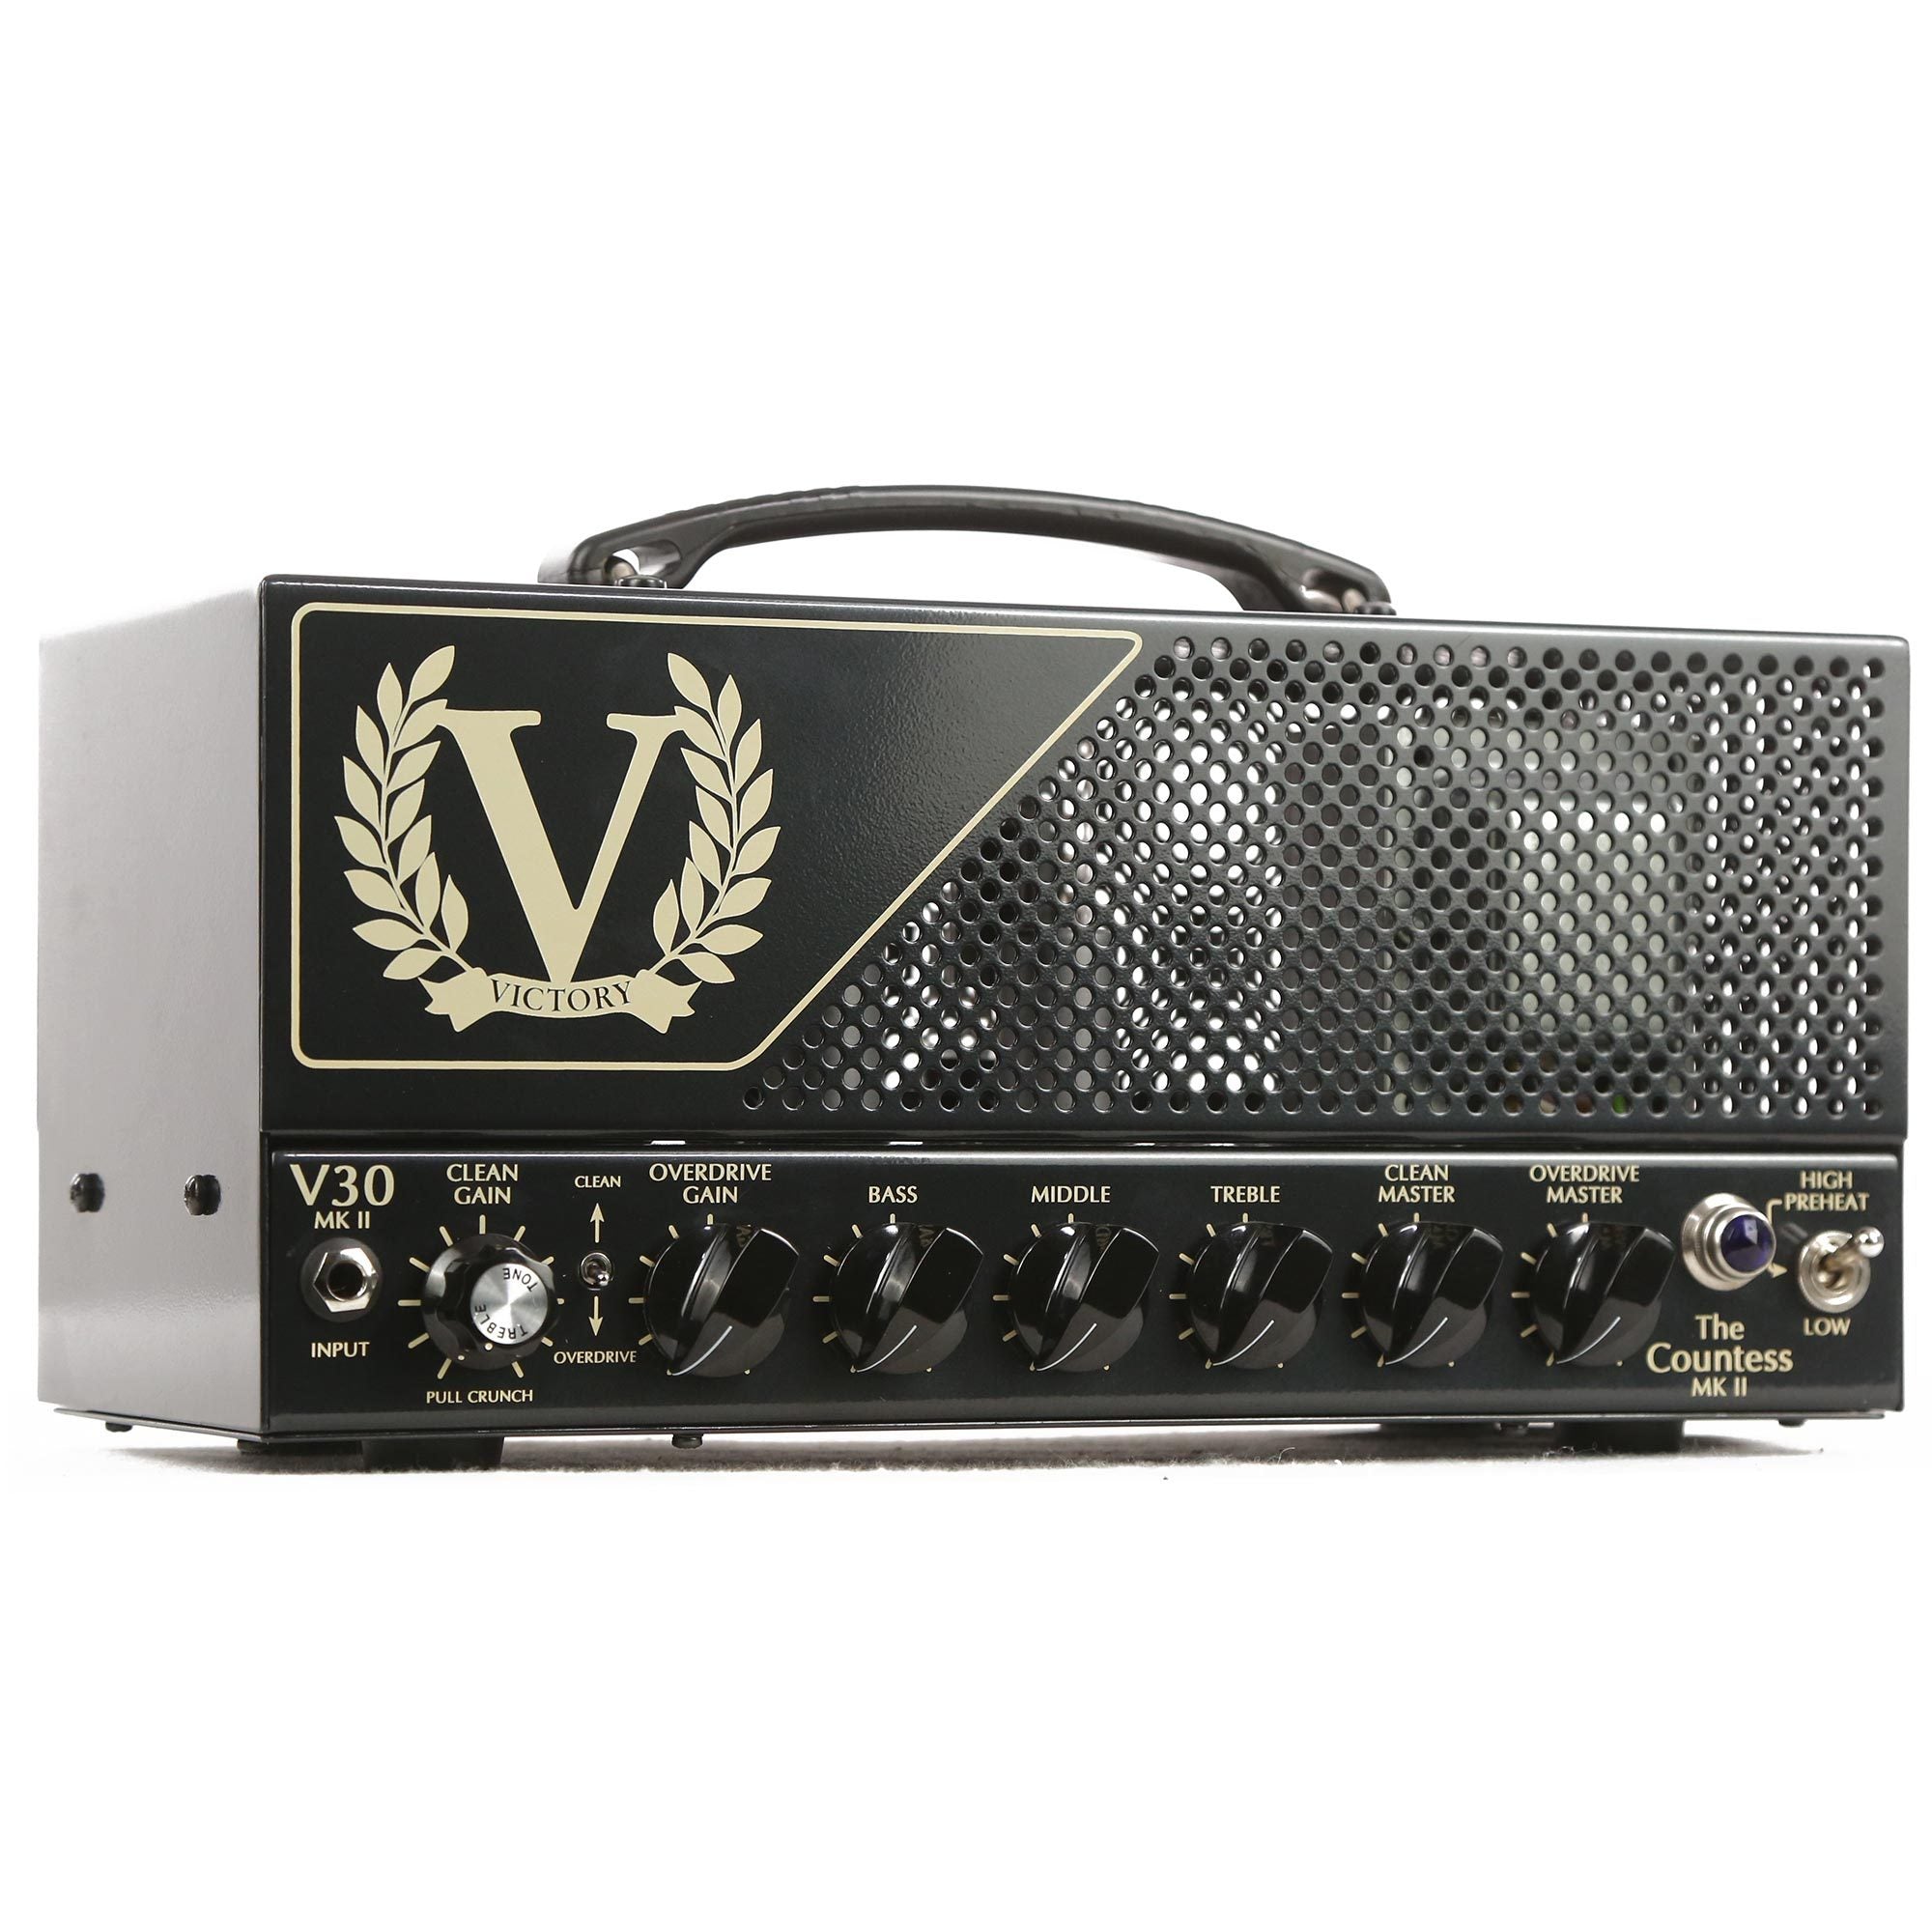 Victory Amplification V30 The Countess MKII Amplifier | The Music Zoo